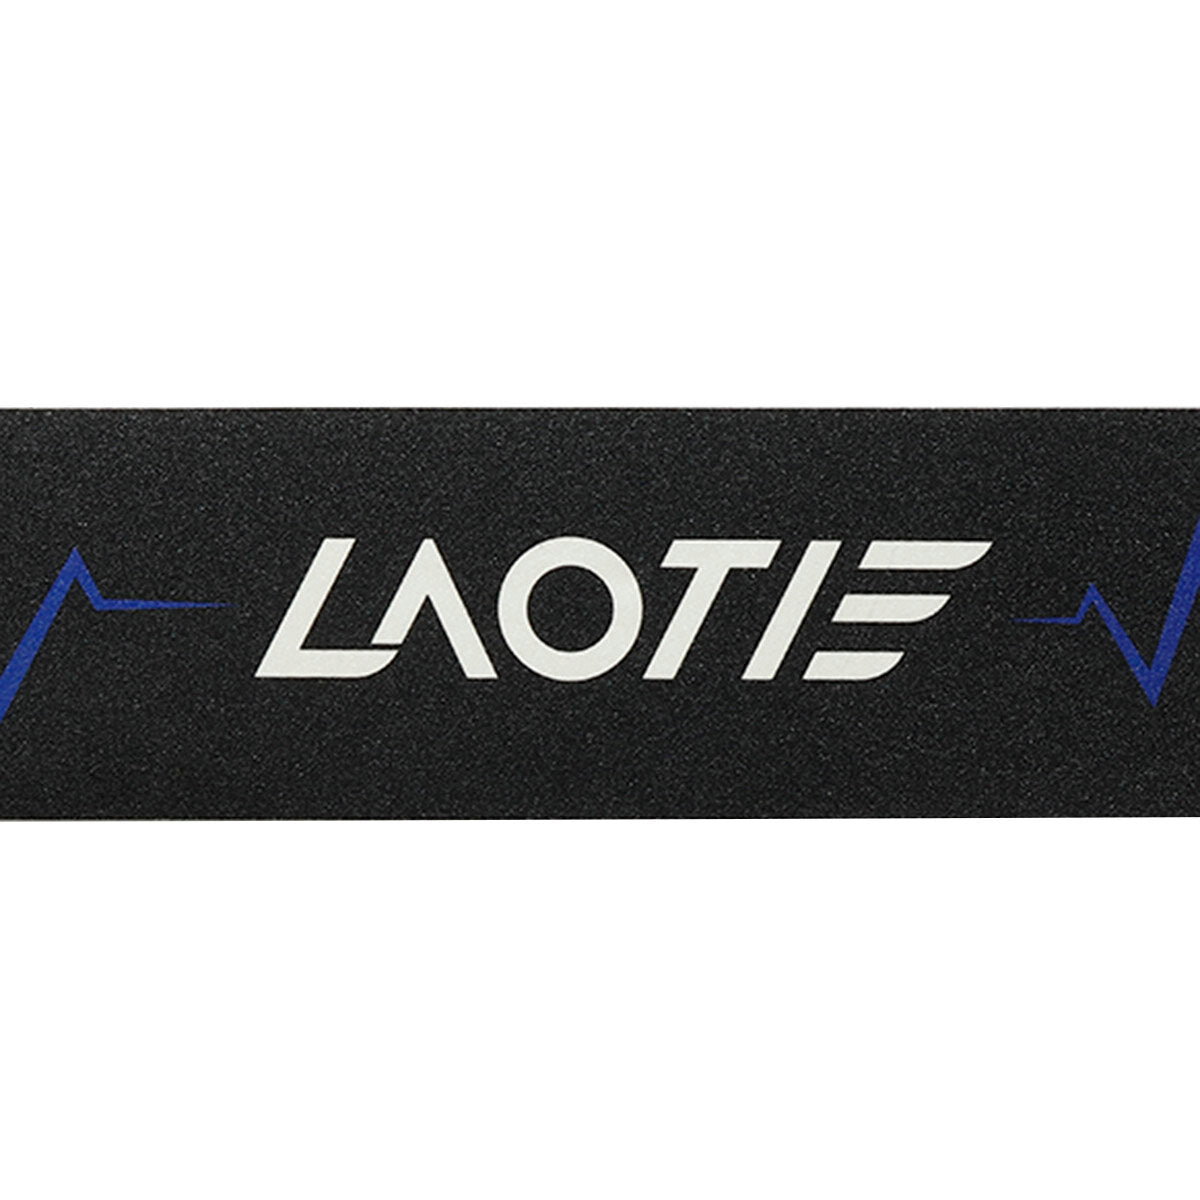 Scooter Pedal Footboard Tape Blue Sandpaper Sticker Anti-slip Waterproof Protective Skate Stickers for All Models of Laotie